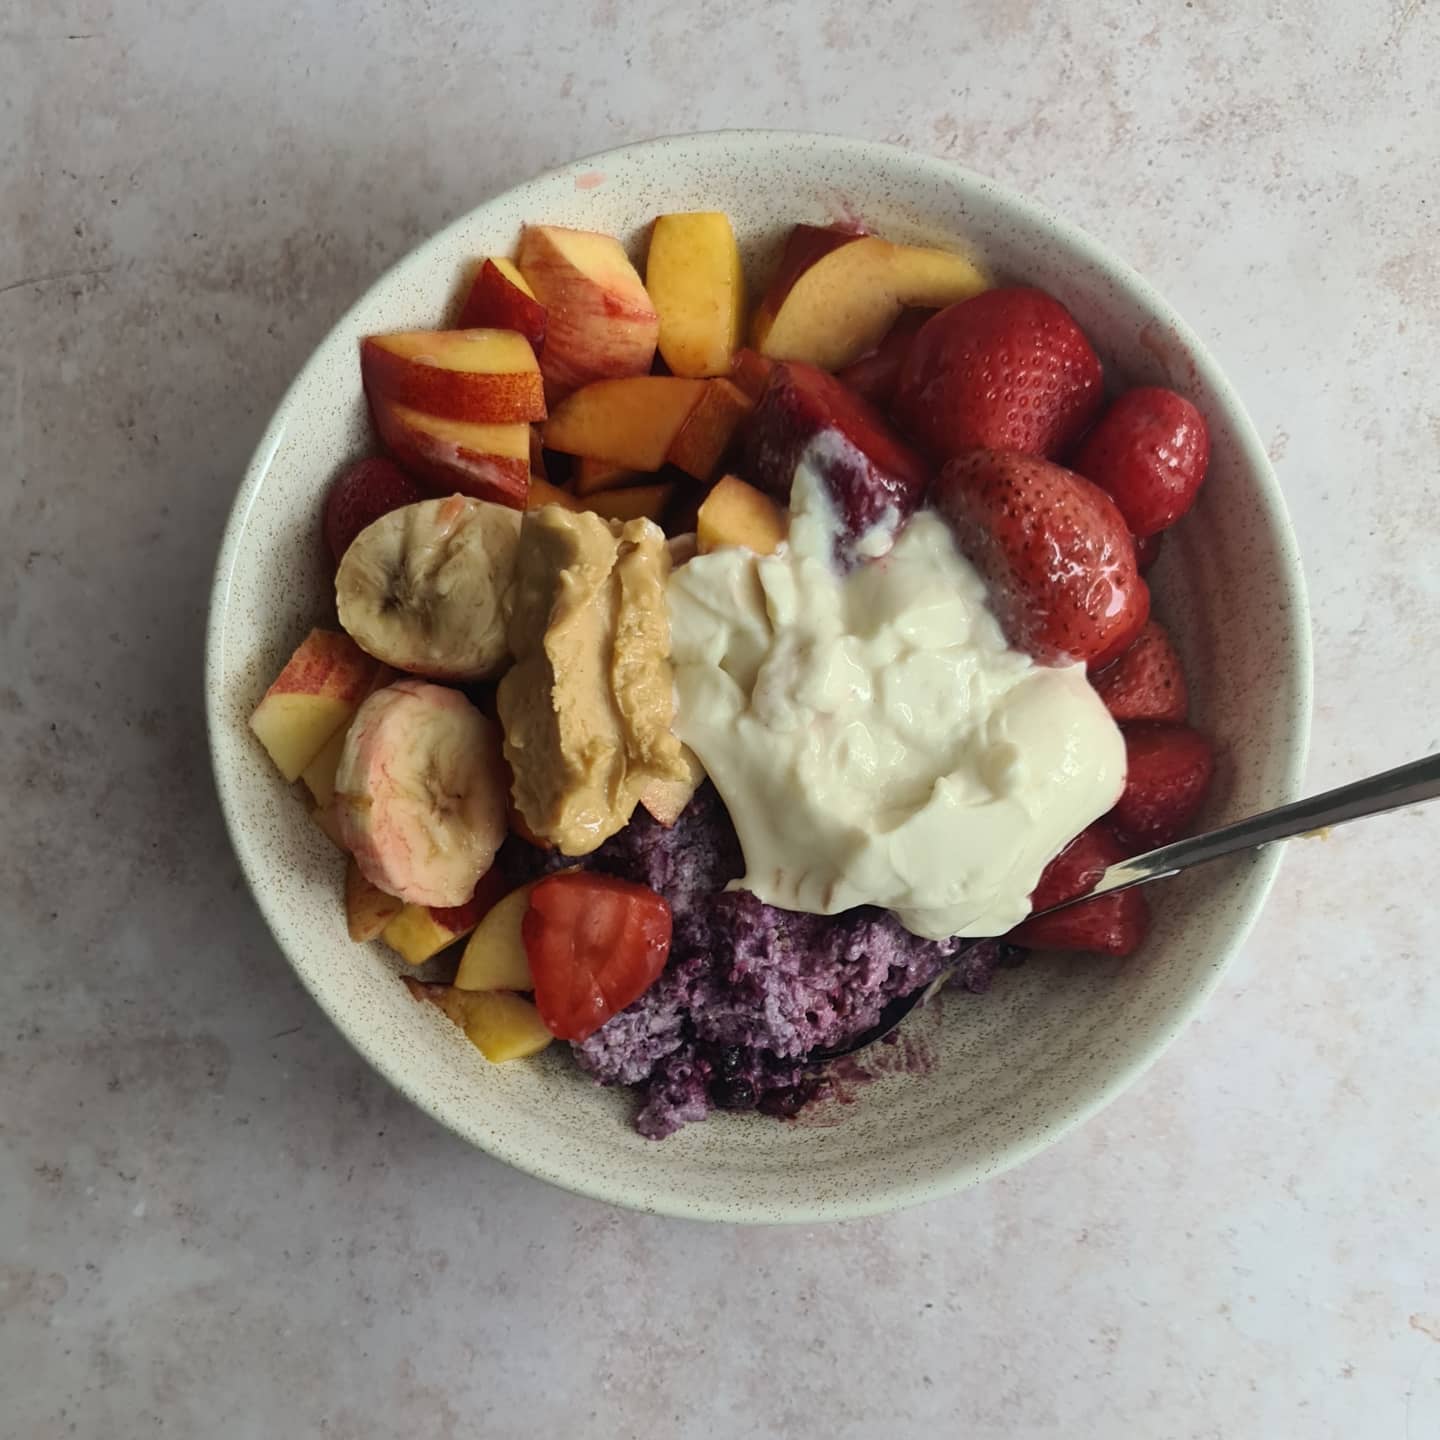 Blueberry Overnight Oats with Fruit Salad and Chocolate Ice Coffee